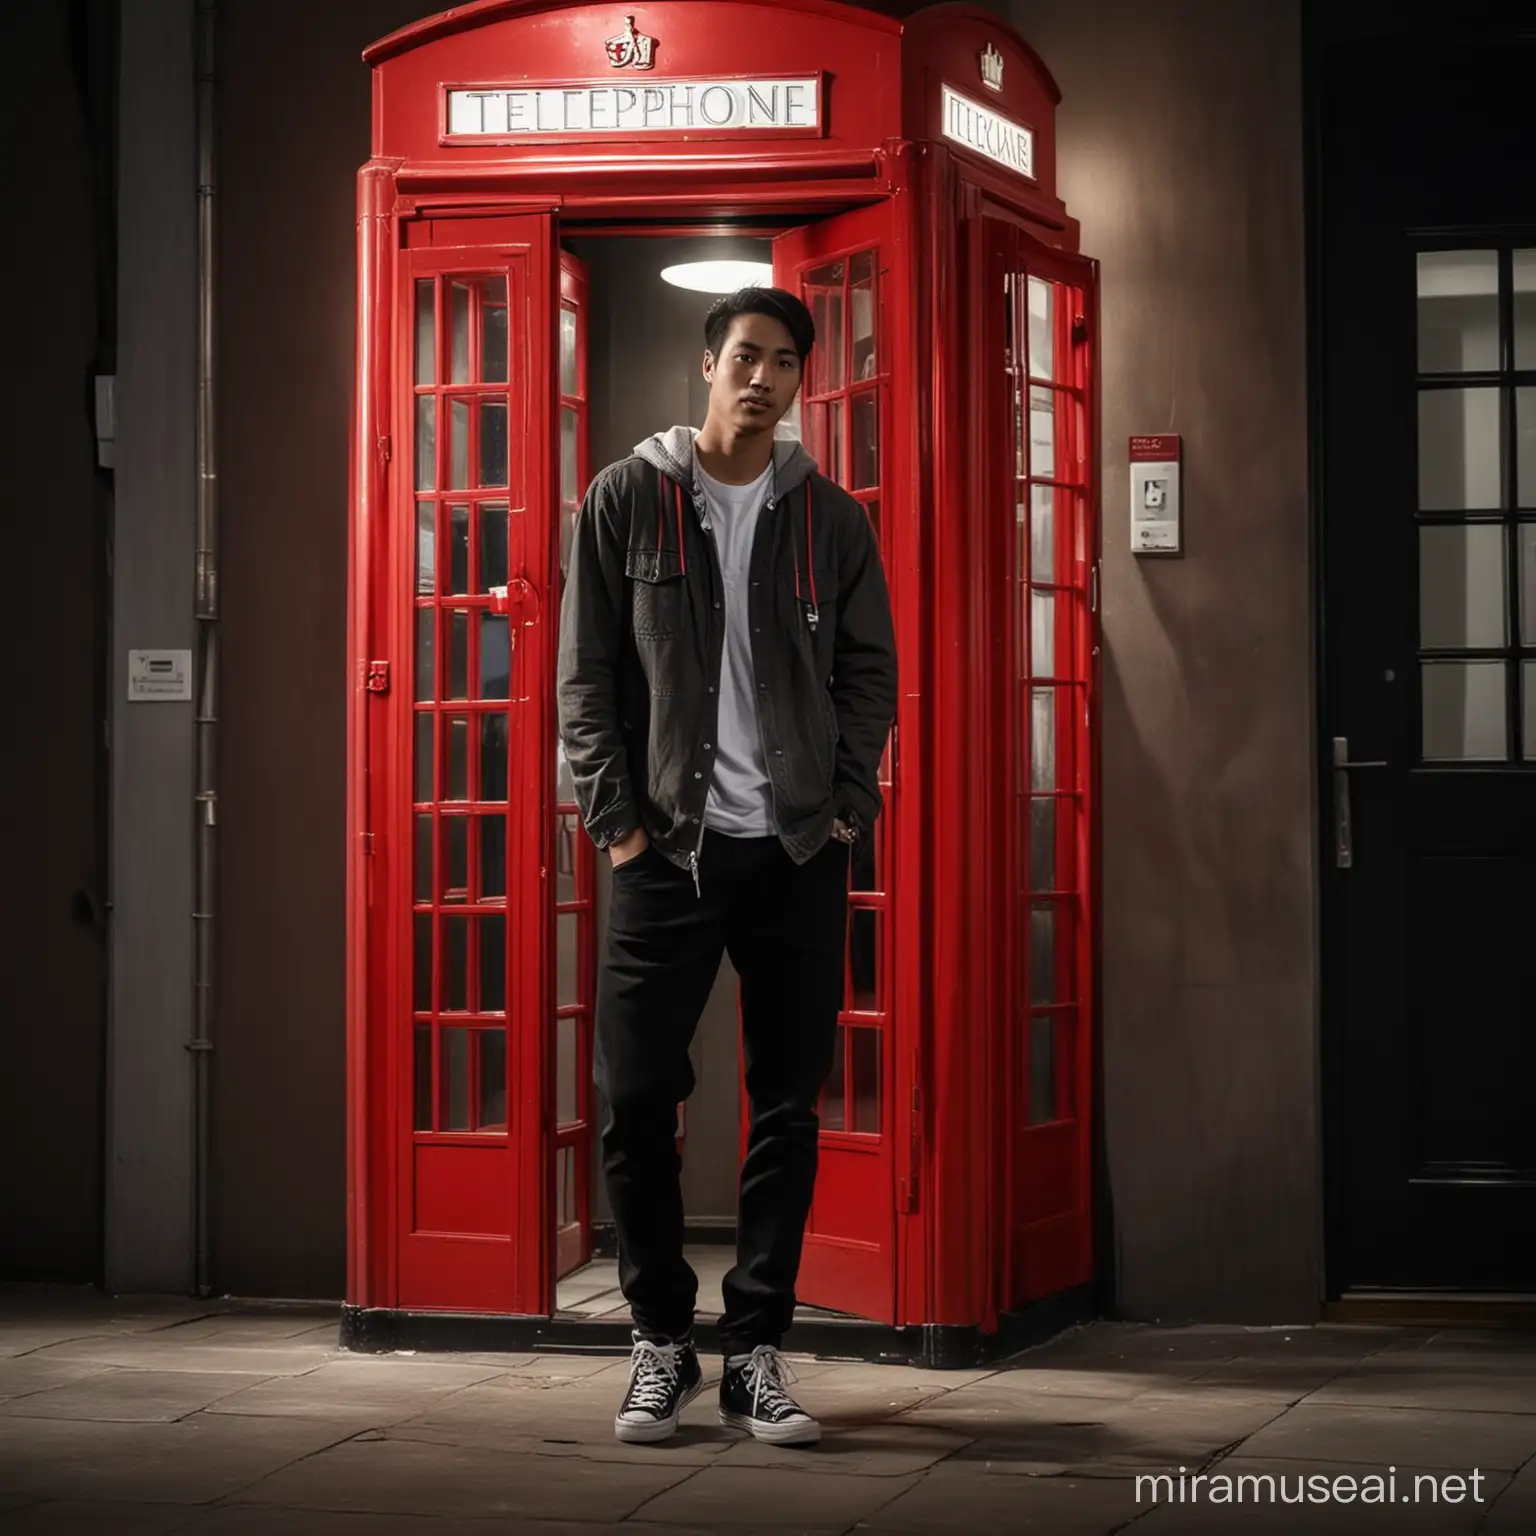 Indonesian Man Daydreaming in Red Telephone Box at Night